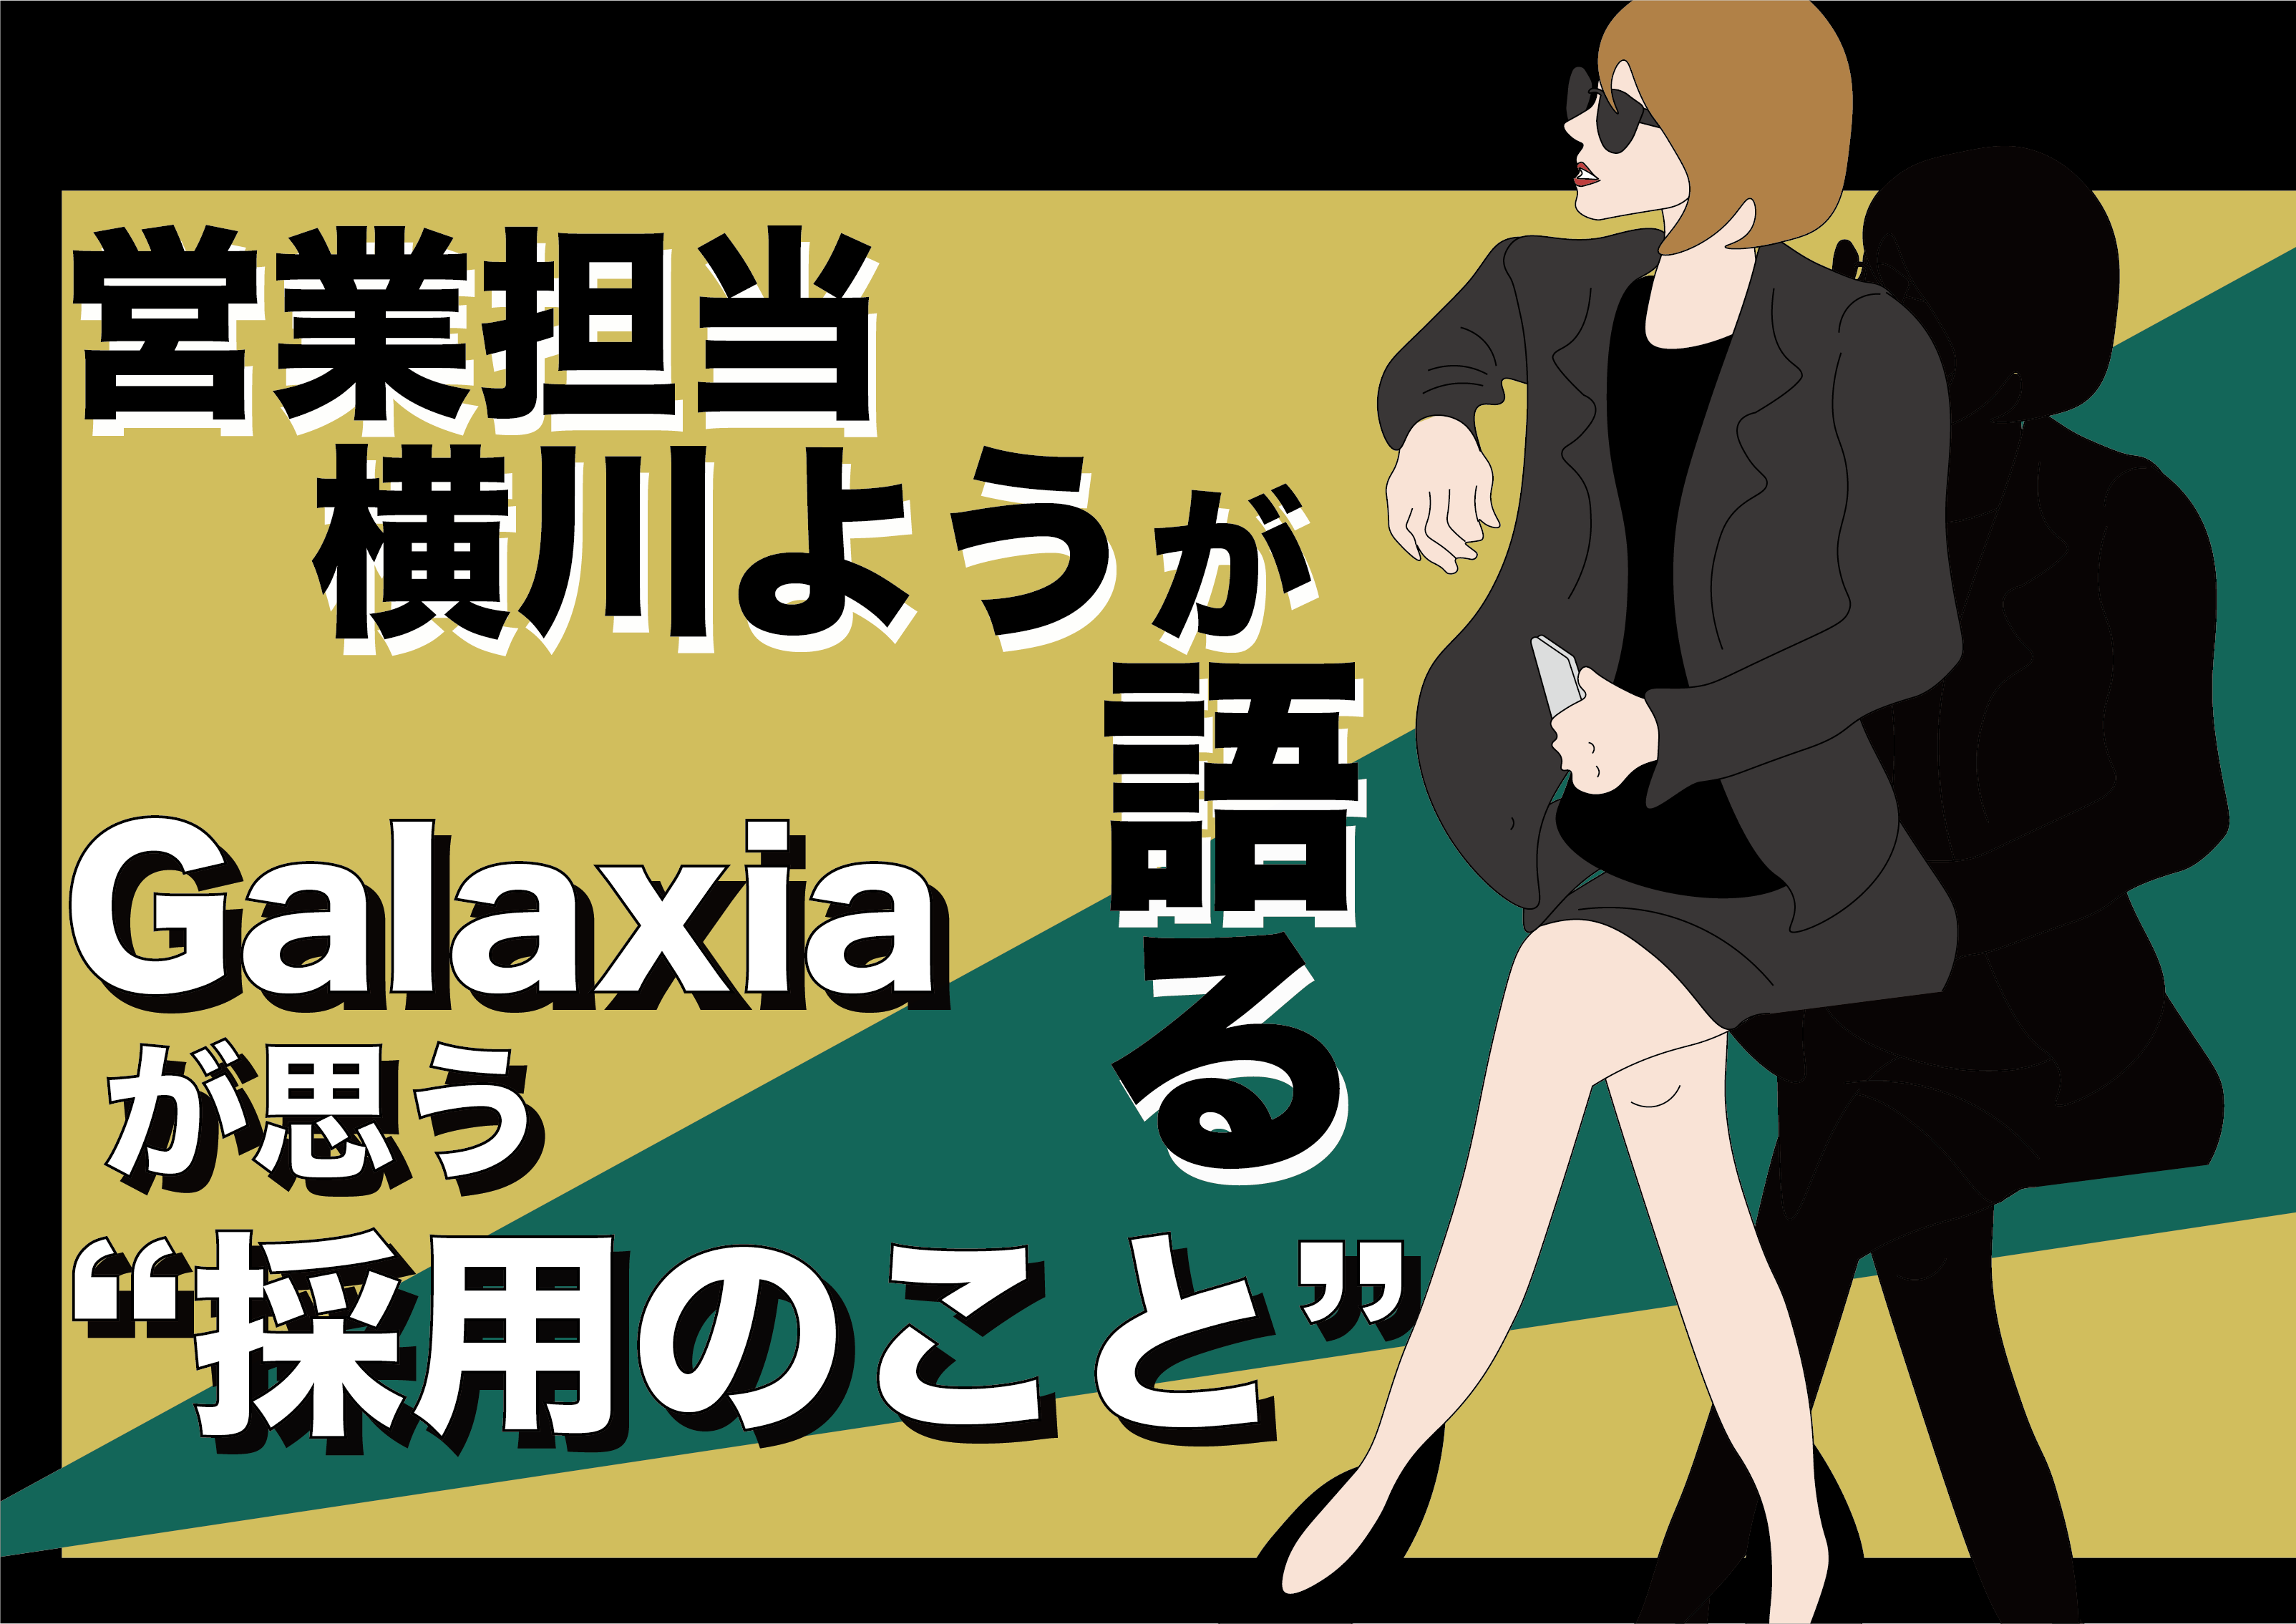 <strong>「Galaxiaが思う“採用のこと”」</strong>